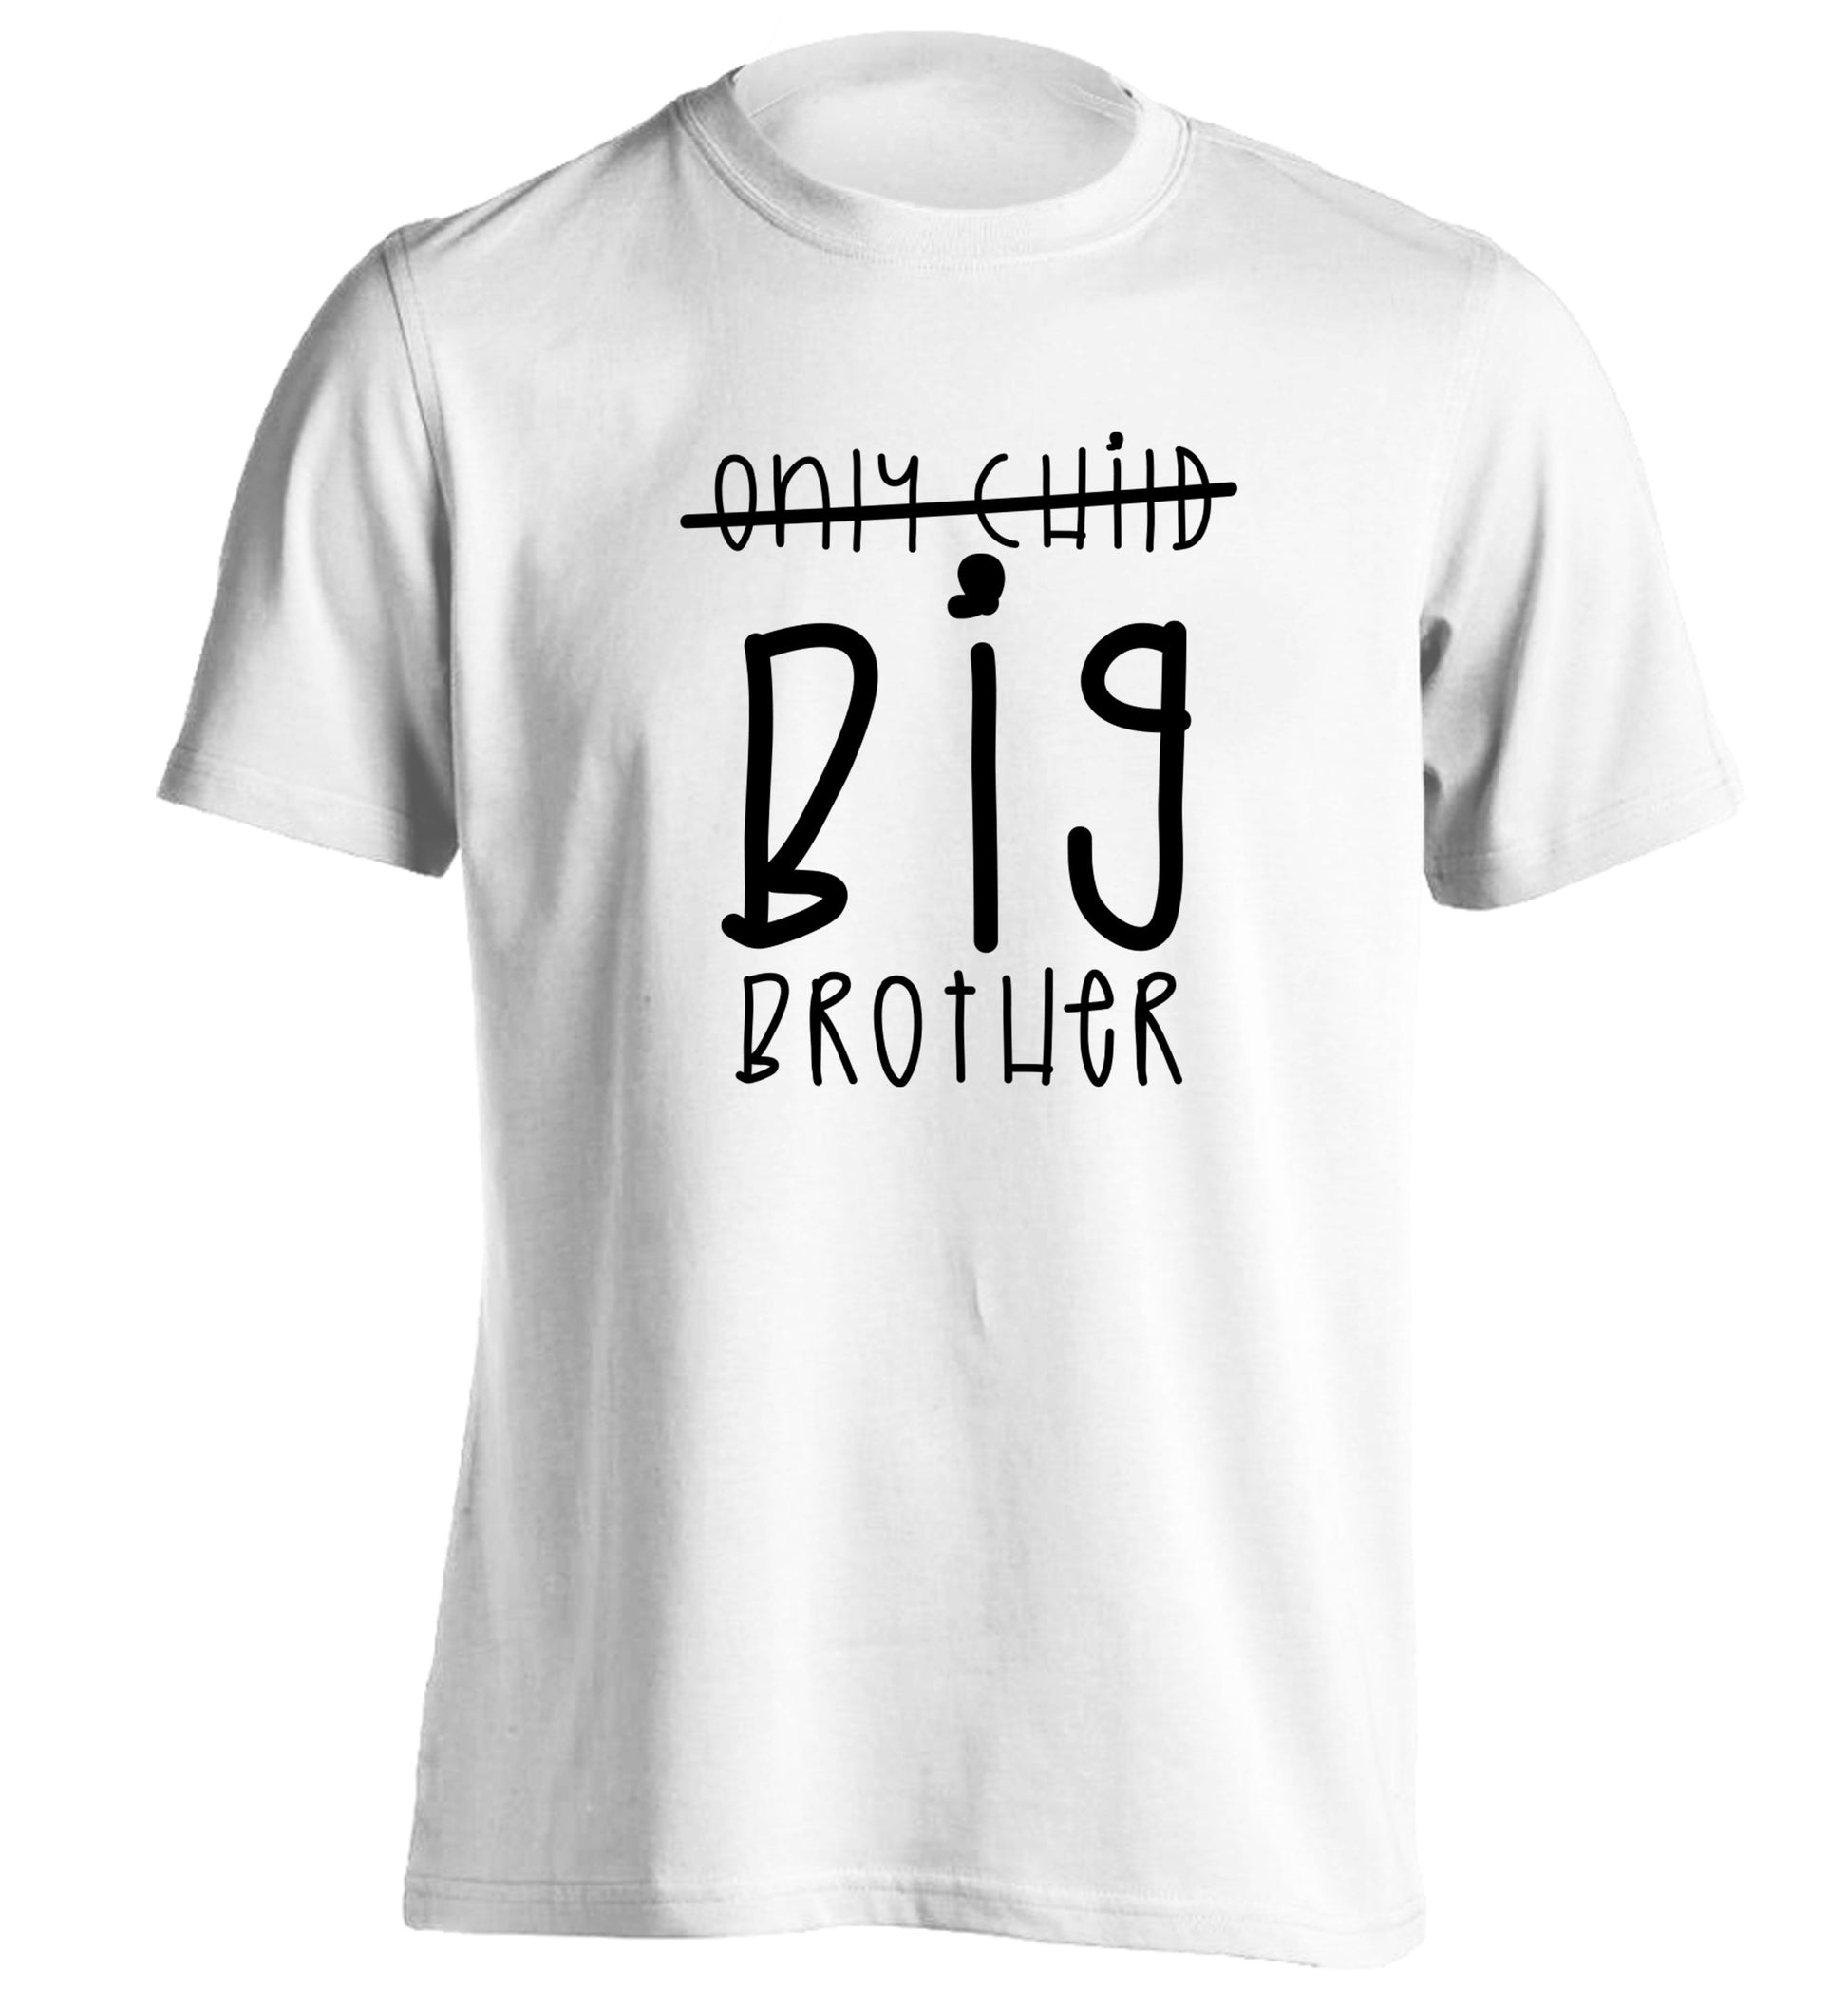 Only child big brother adults unisex white Tshirt 2XL